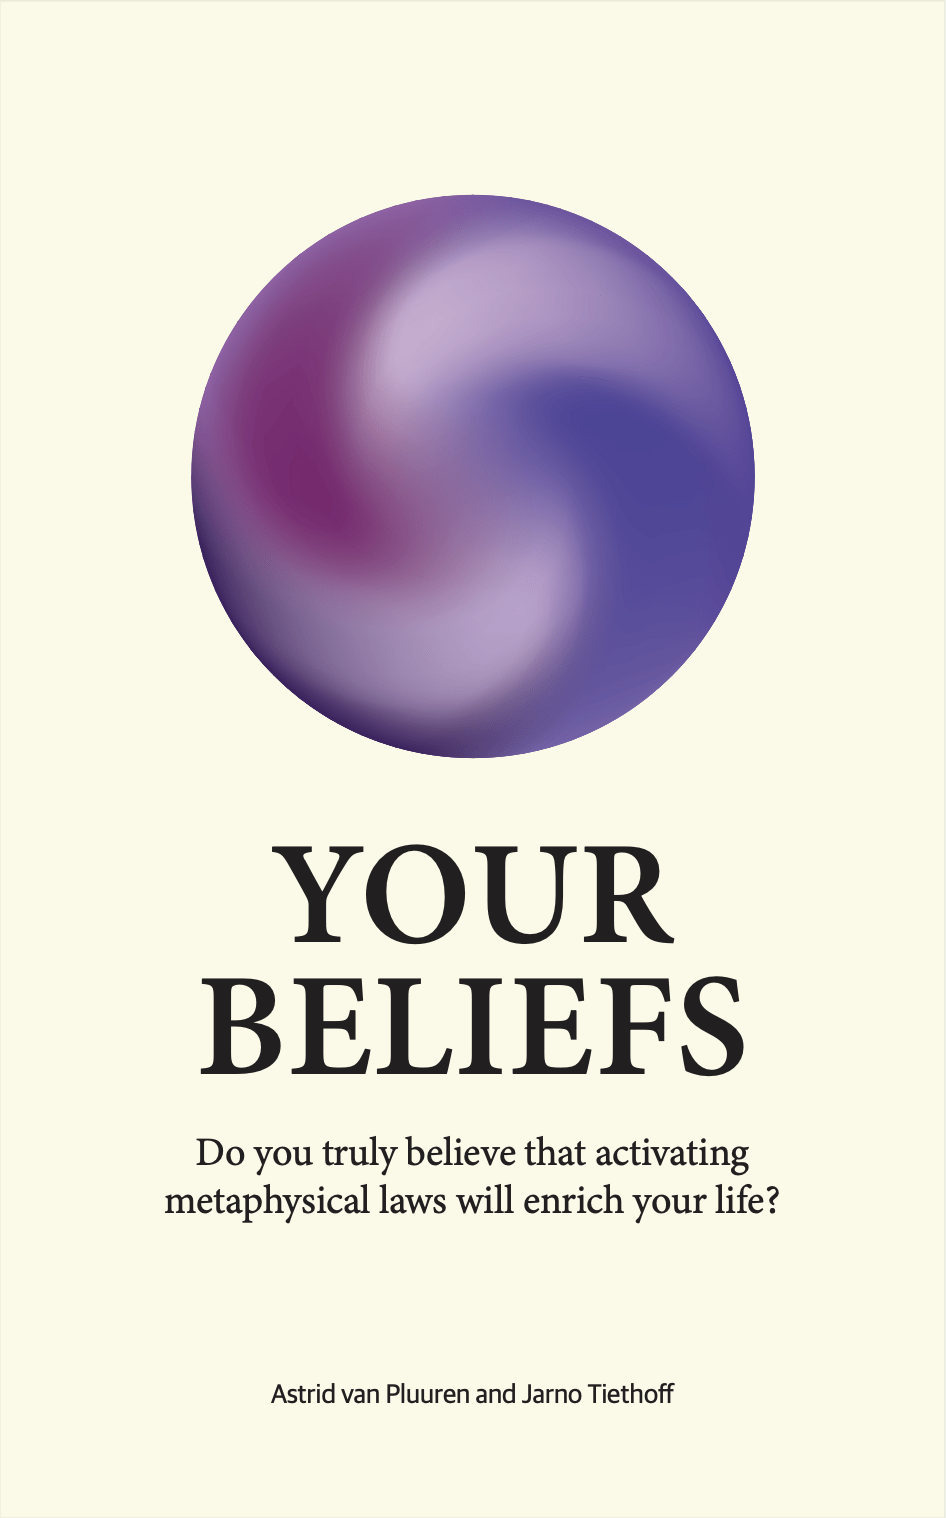 Your Beliefs | Do you truly believe that activating metaphysical laws will enrich your life? Astrid van Pluuren and Jarno Tiethoff.